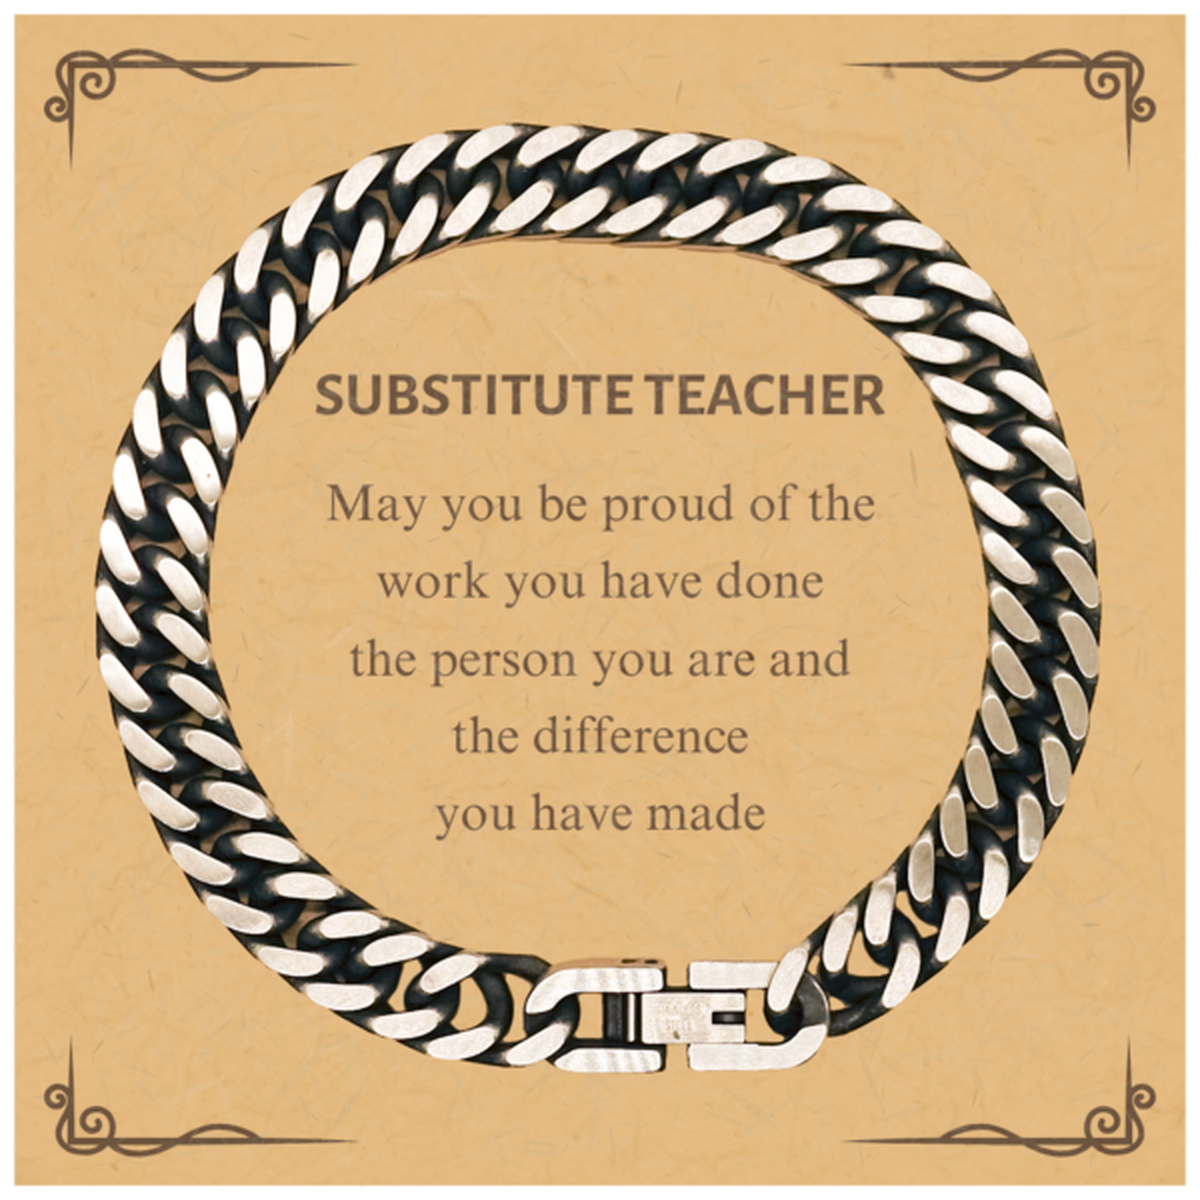 Substitute Teacher May you be proud of the work you have done, Retirement Substitute Teacher Cuban Link Chain Bracelet for Colleague Appreciation Gifts Amazing for Substitute Teacher